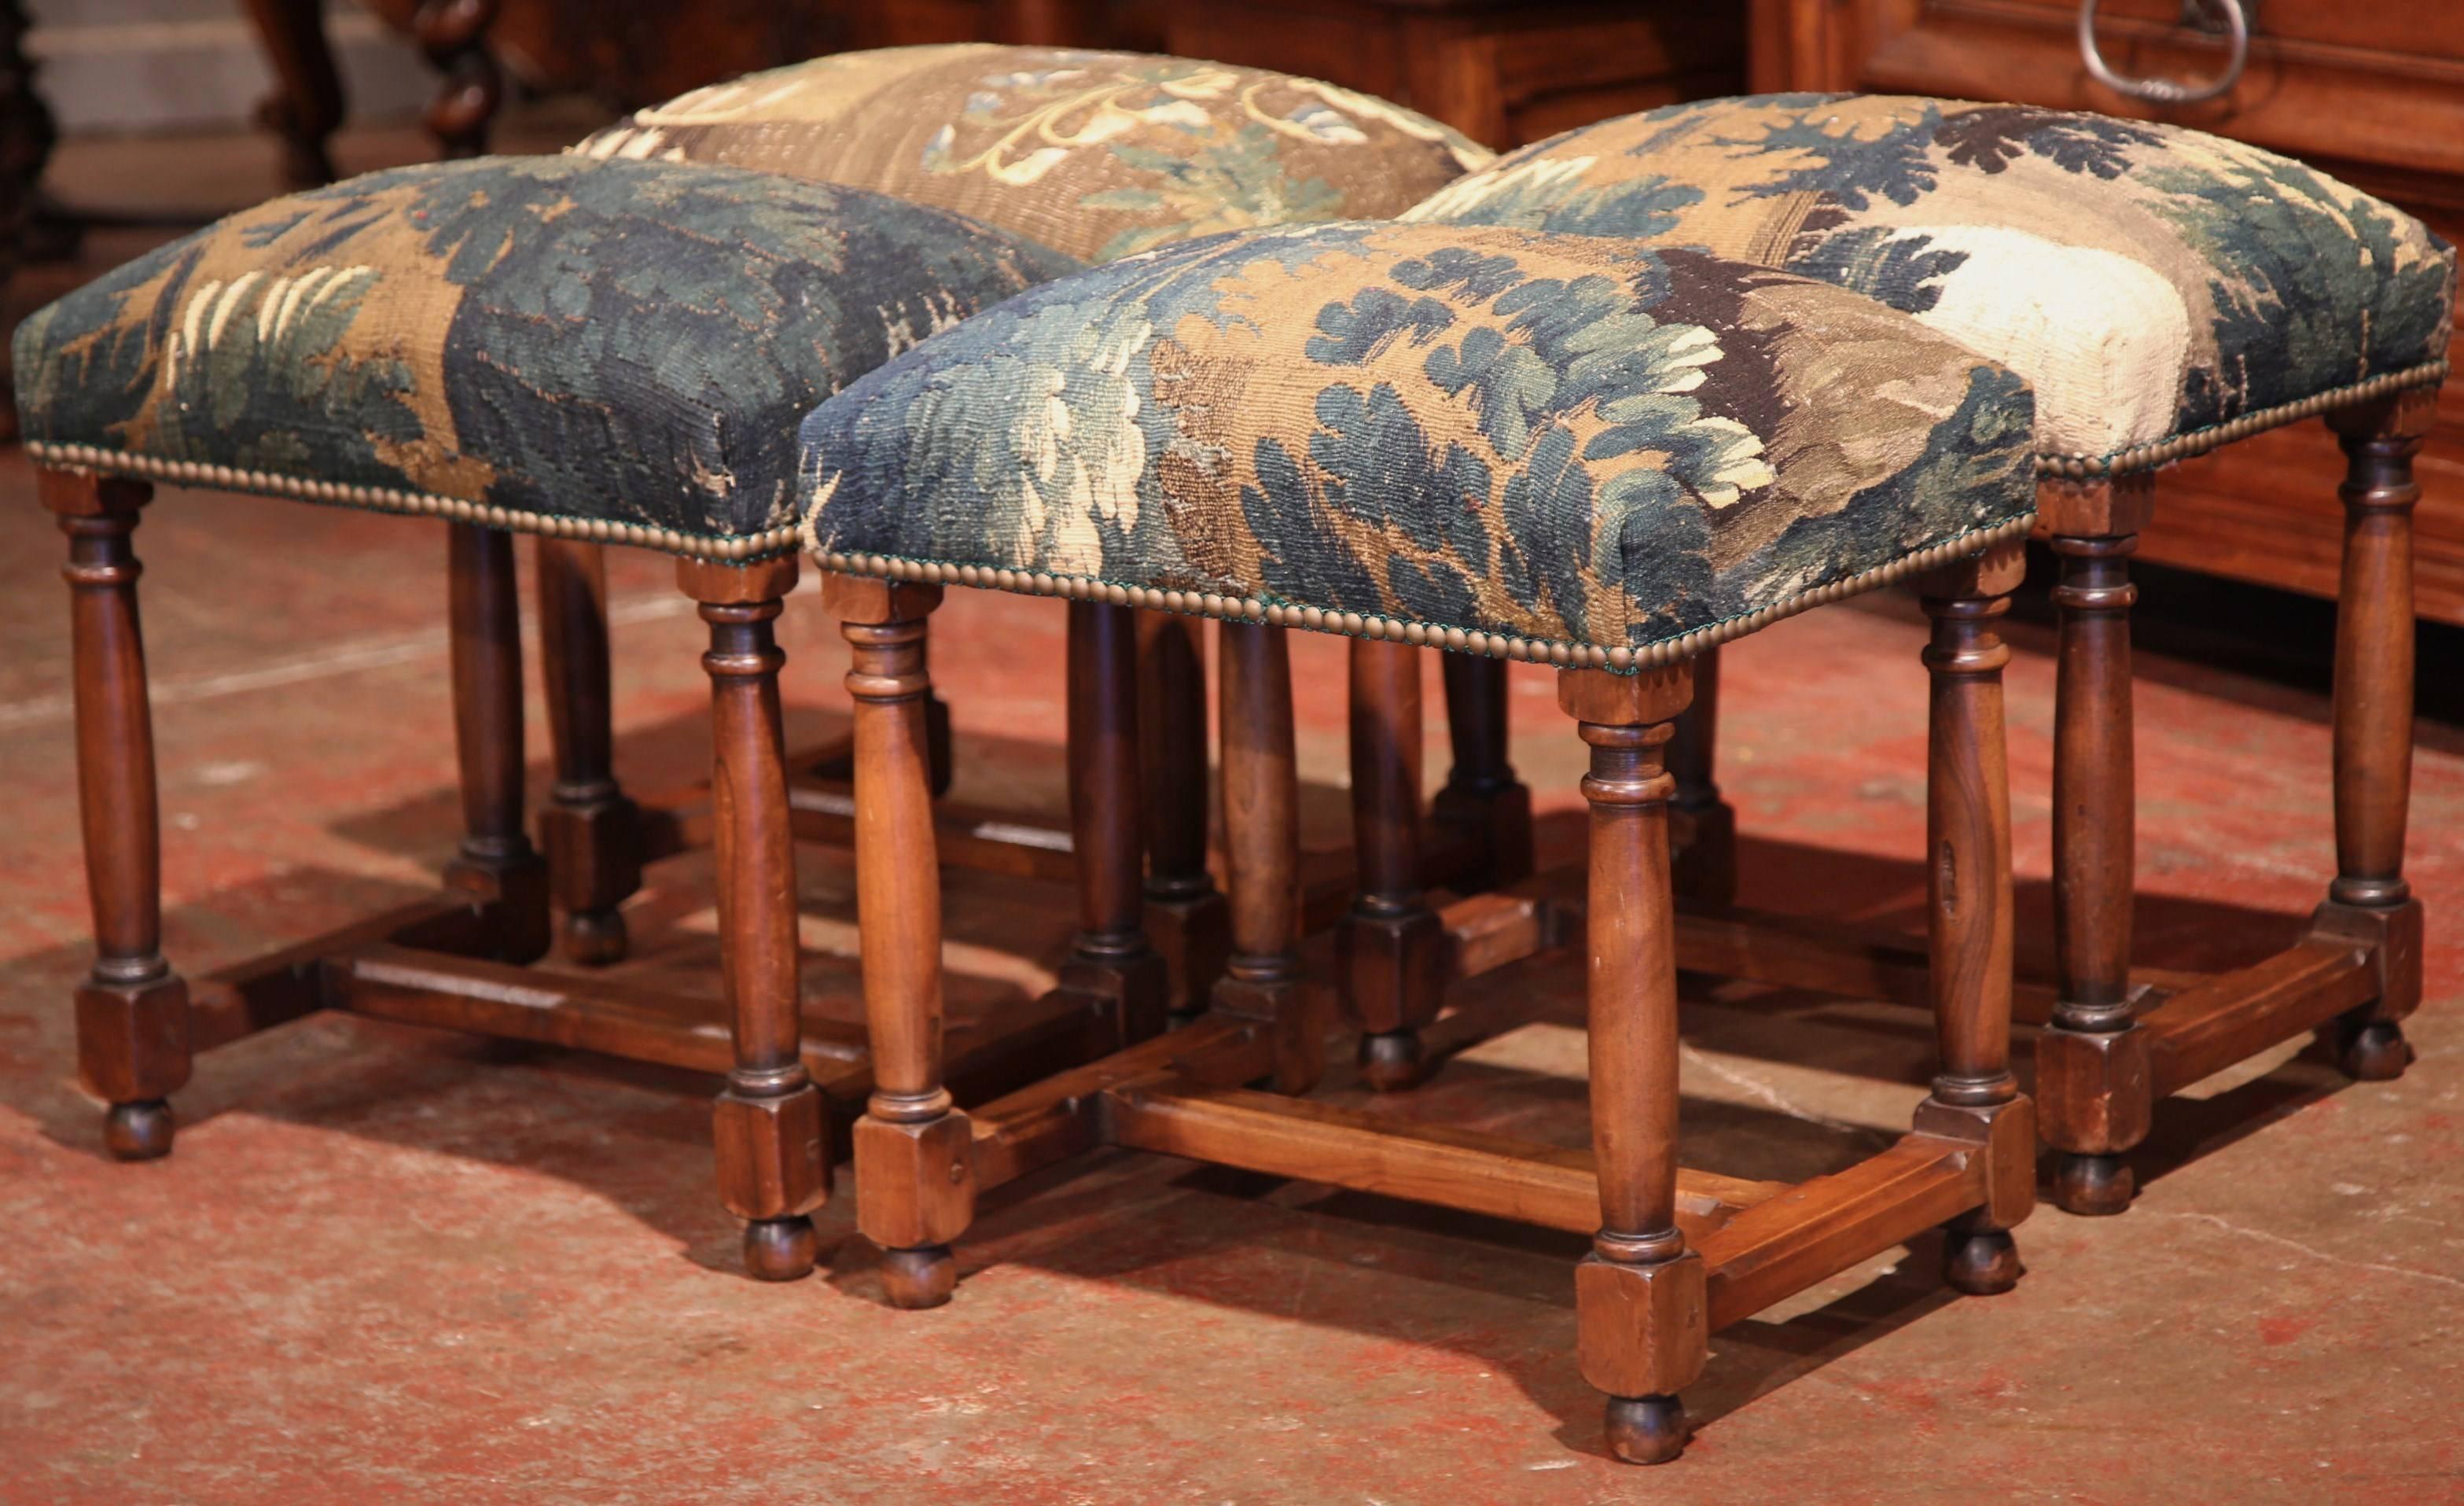 Hand-Carved 19th Century French Suite of Four Carved Walnut Stools with Aubusson Tapestry